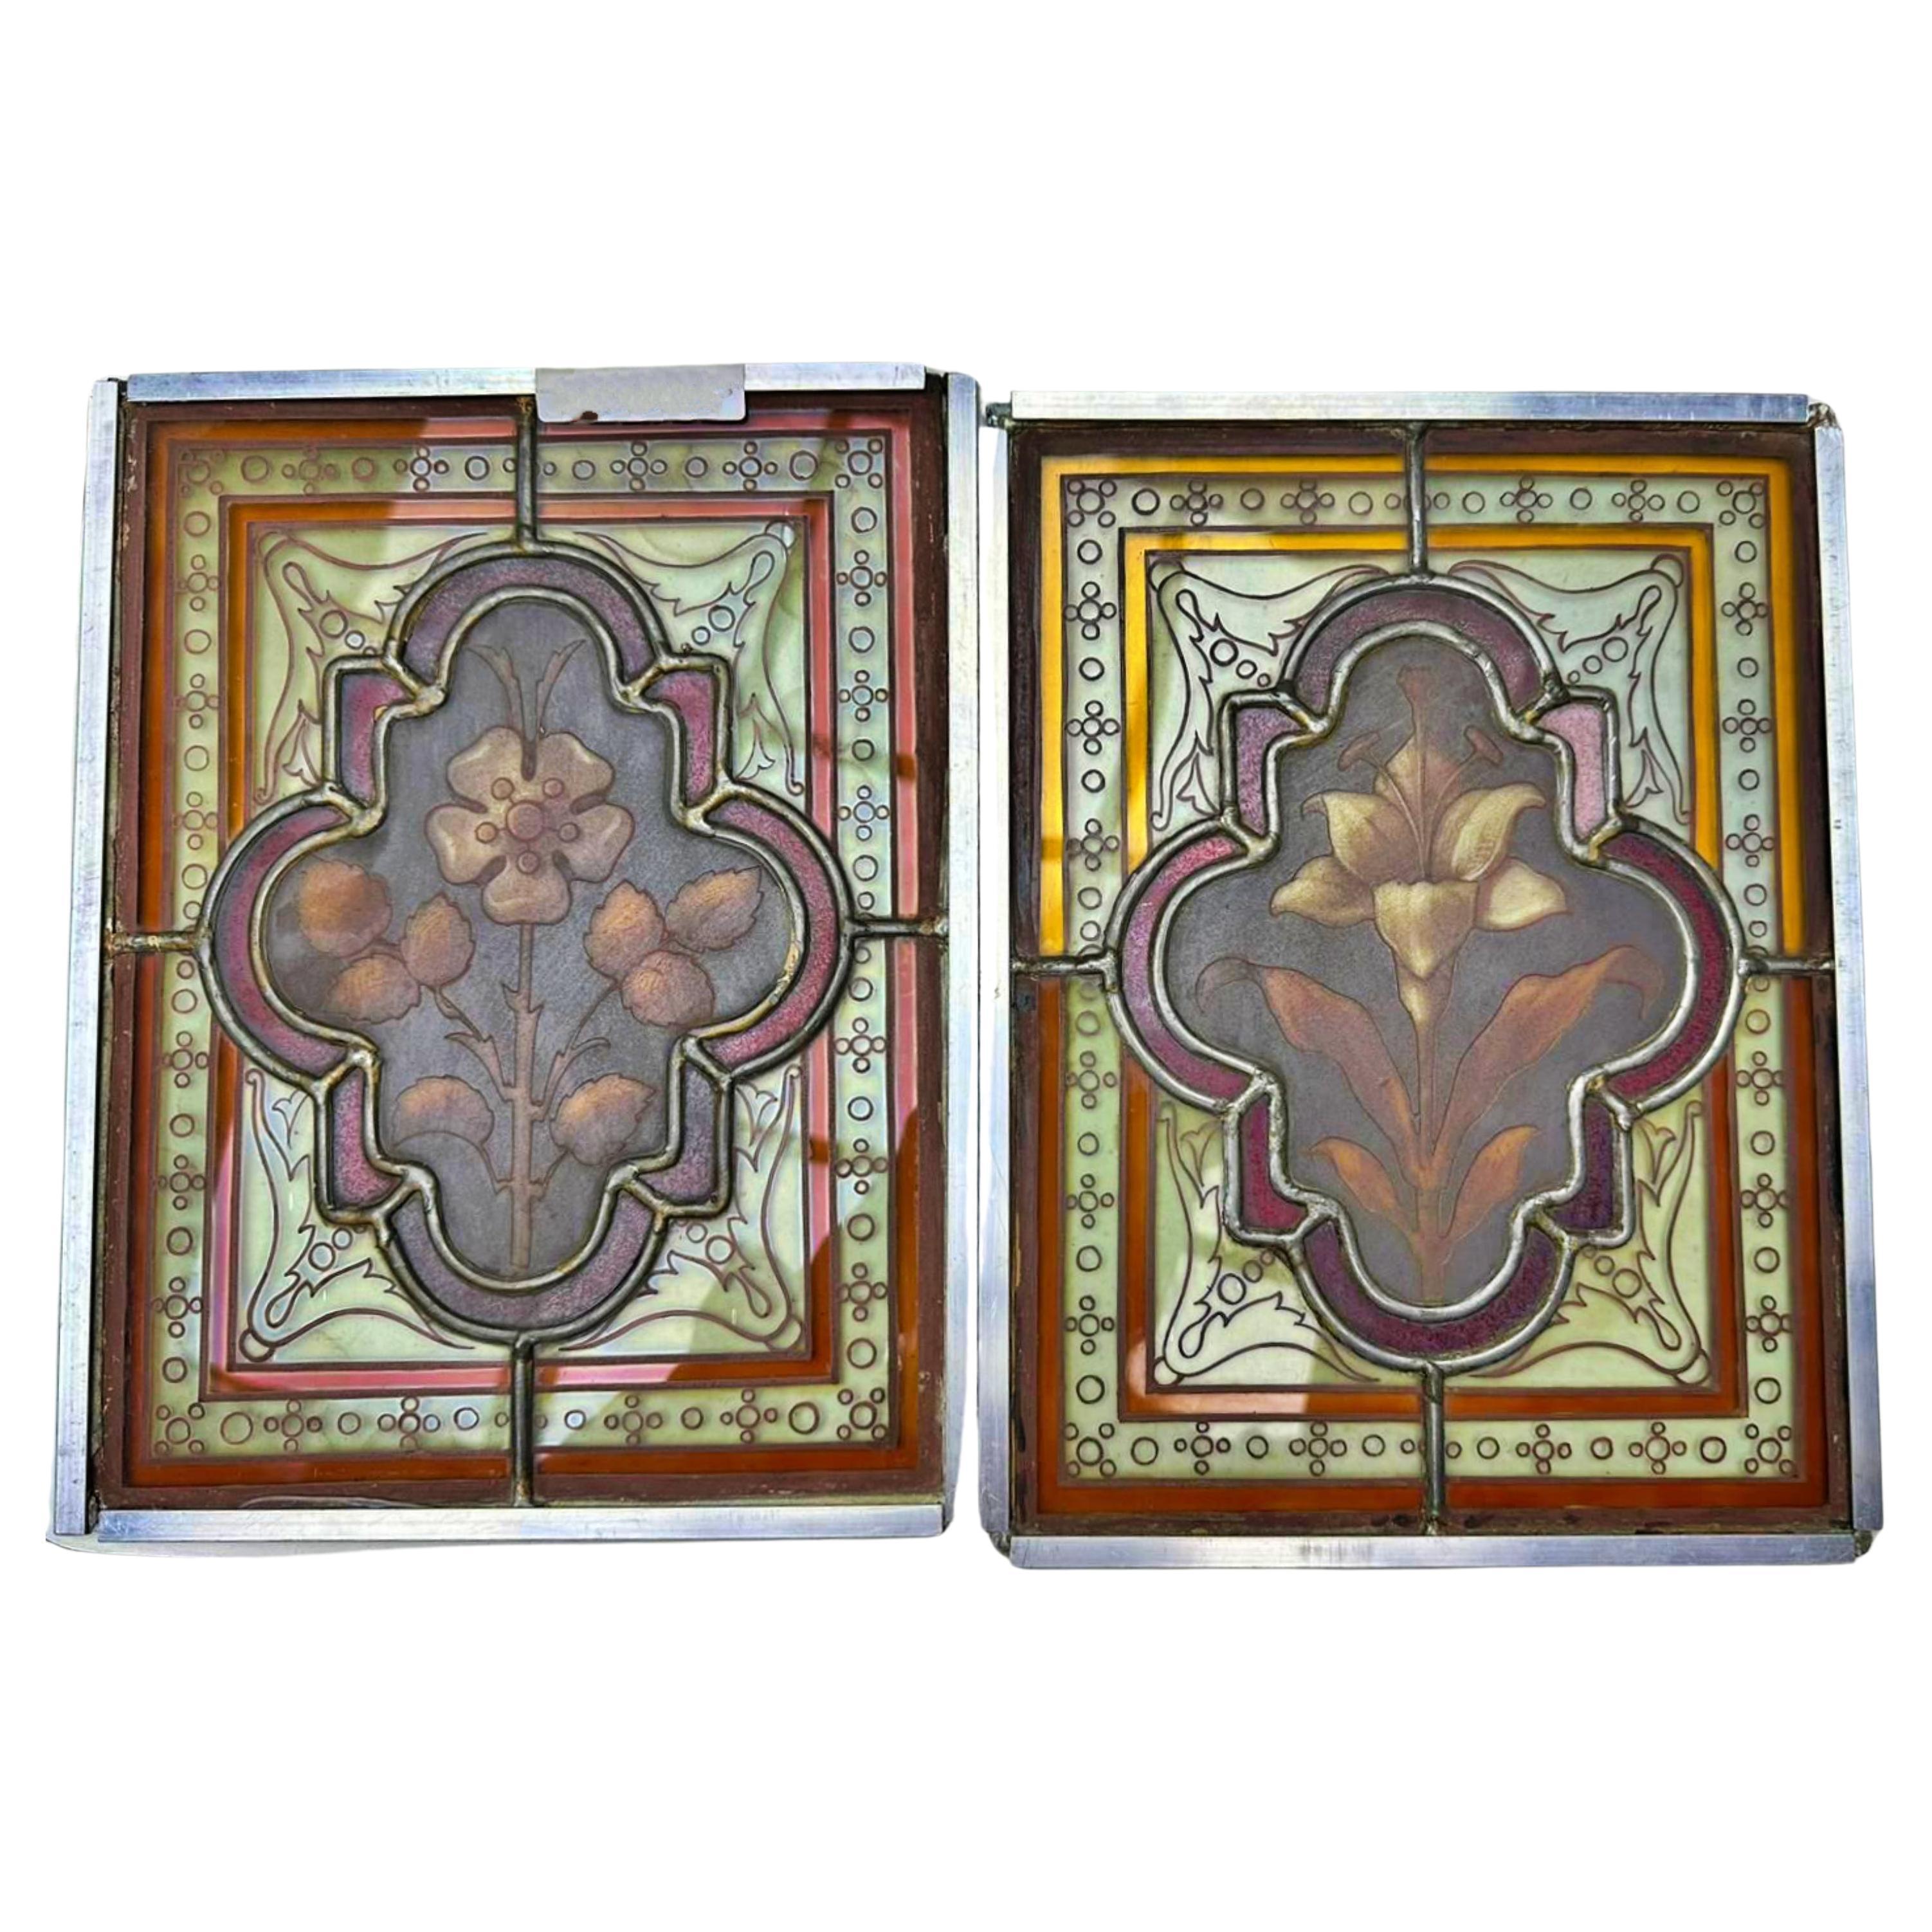 Pair of Italian Art Deco Panels late 19th Century "Flower Decorations" For Sale